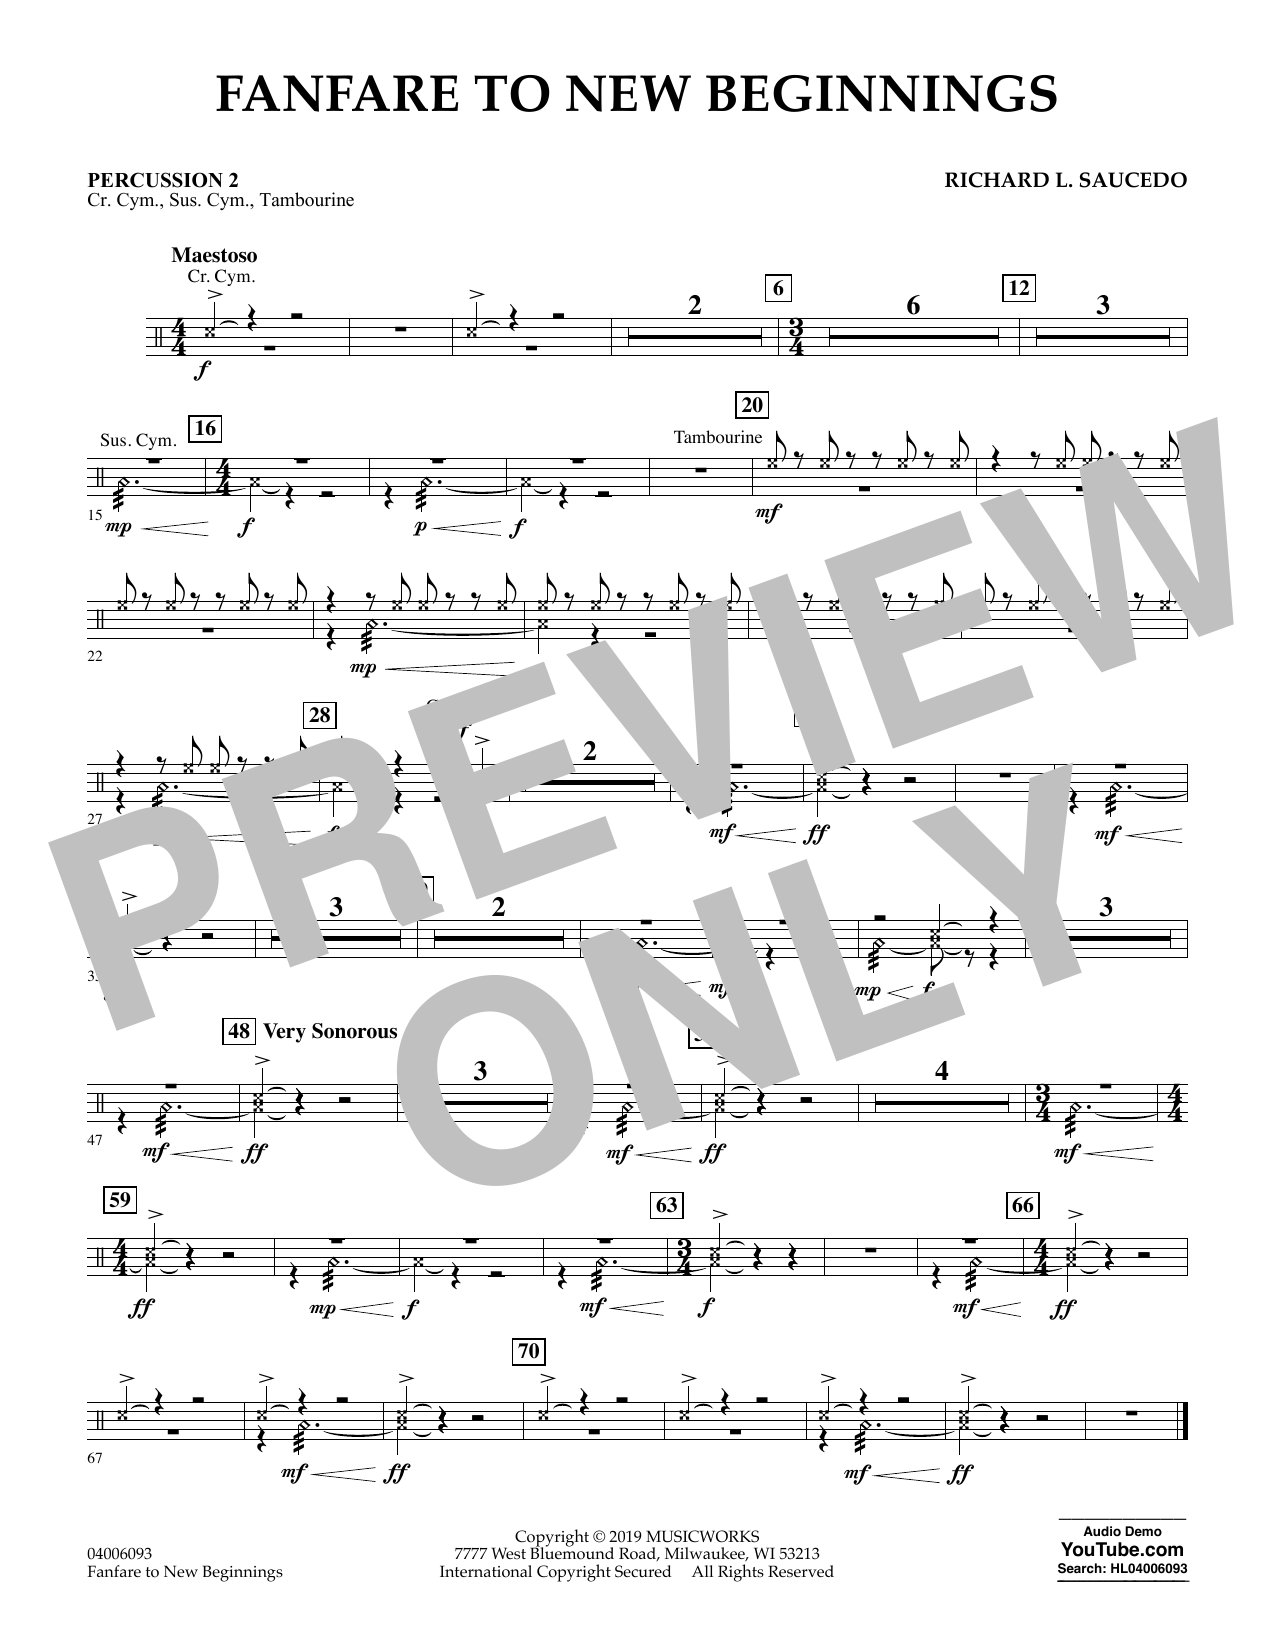 Download Richard L. Saucedo Fanfare for New Beginnings - Percussion Sheet Music